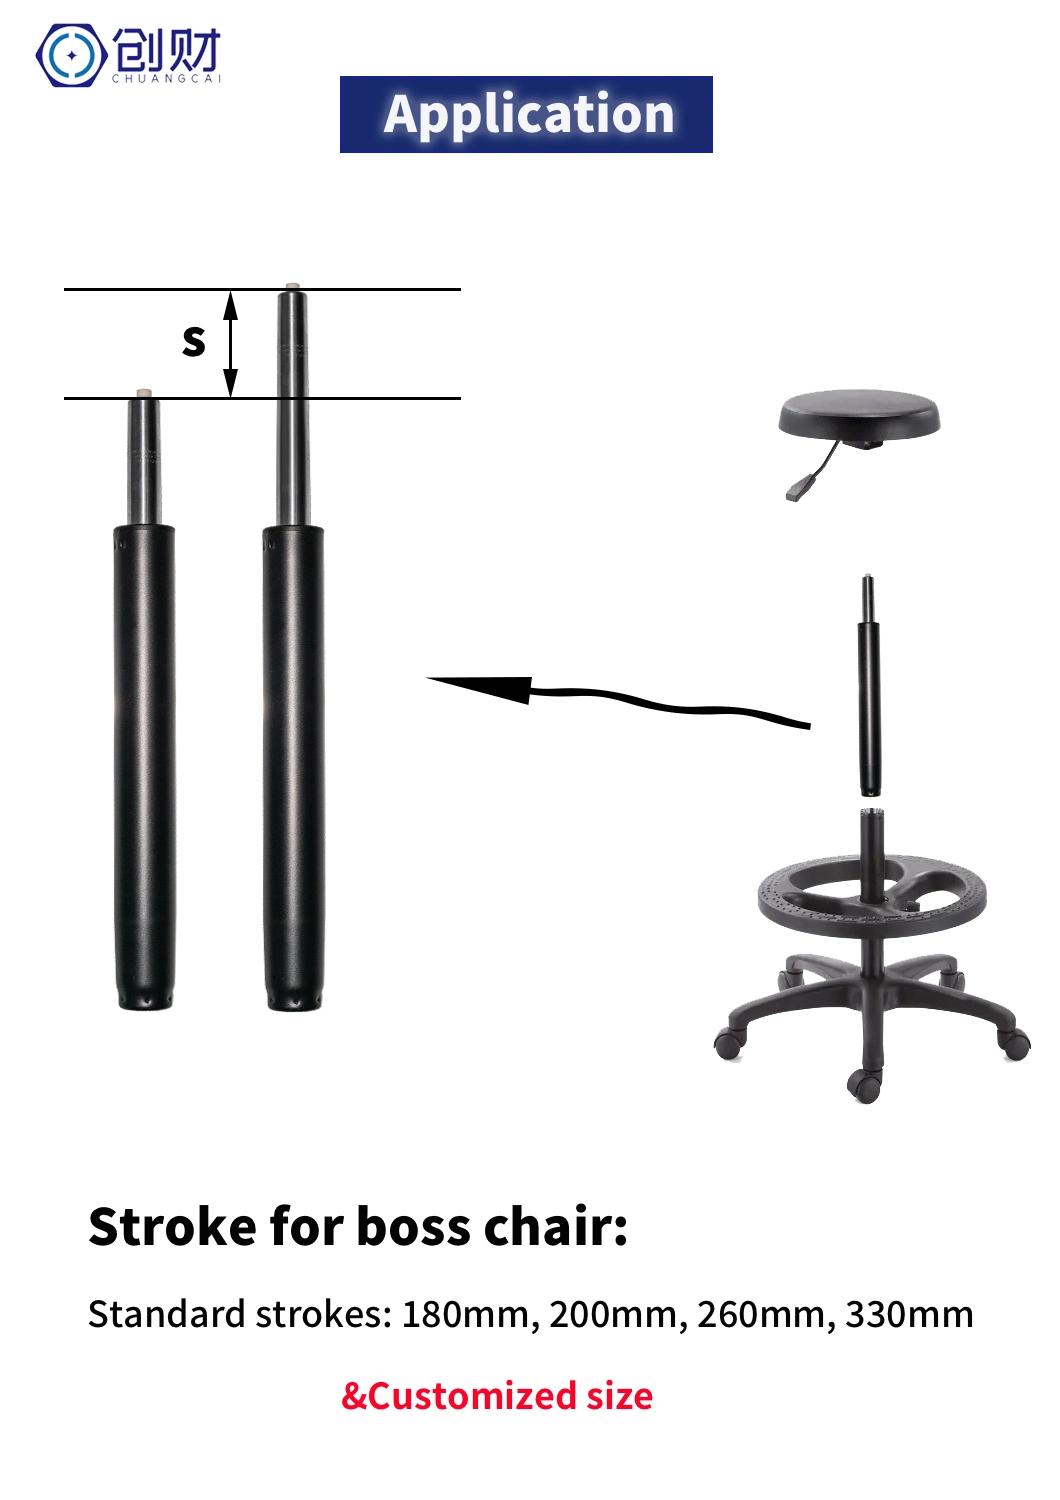 Interchangeable Cylindrical Gas Spring for Bar Chair